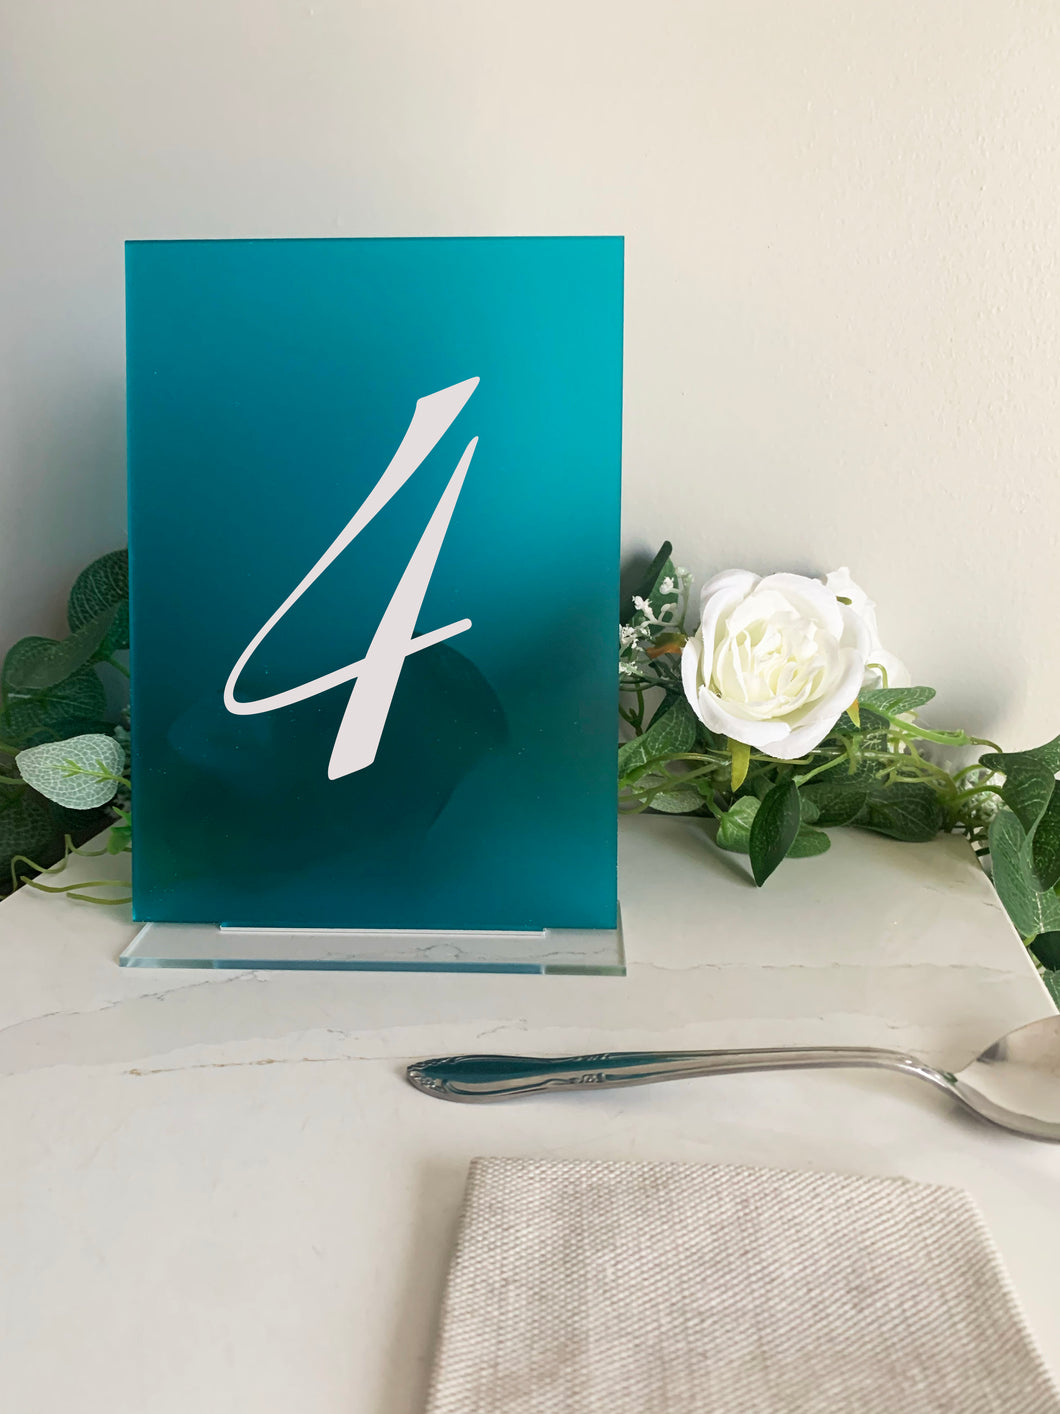 Unique Rectangular Freestanding Acrylic Table Number Signs for Wedding